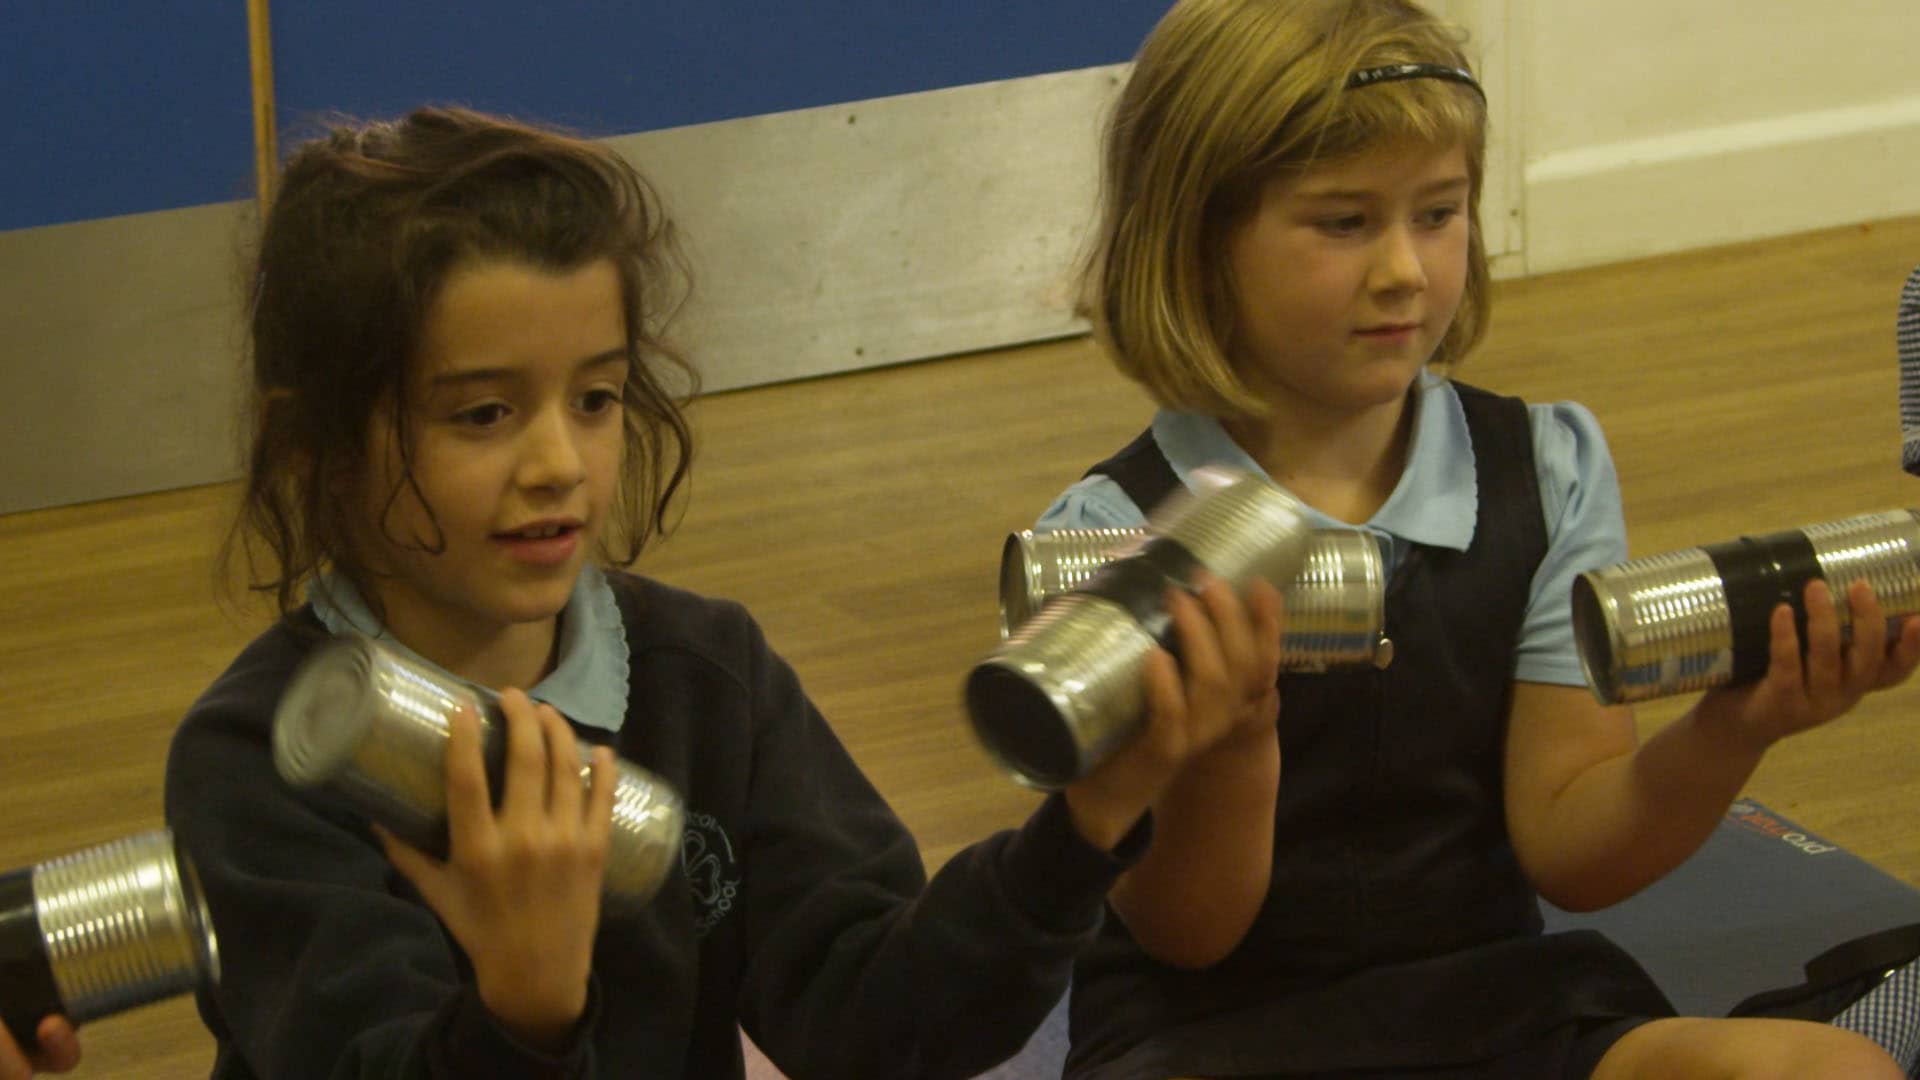 School children playing music on recycled tin cans